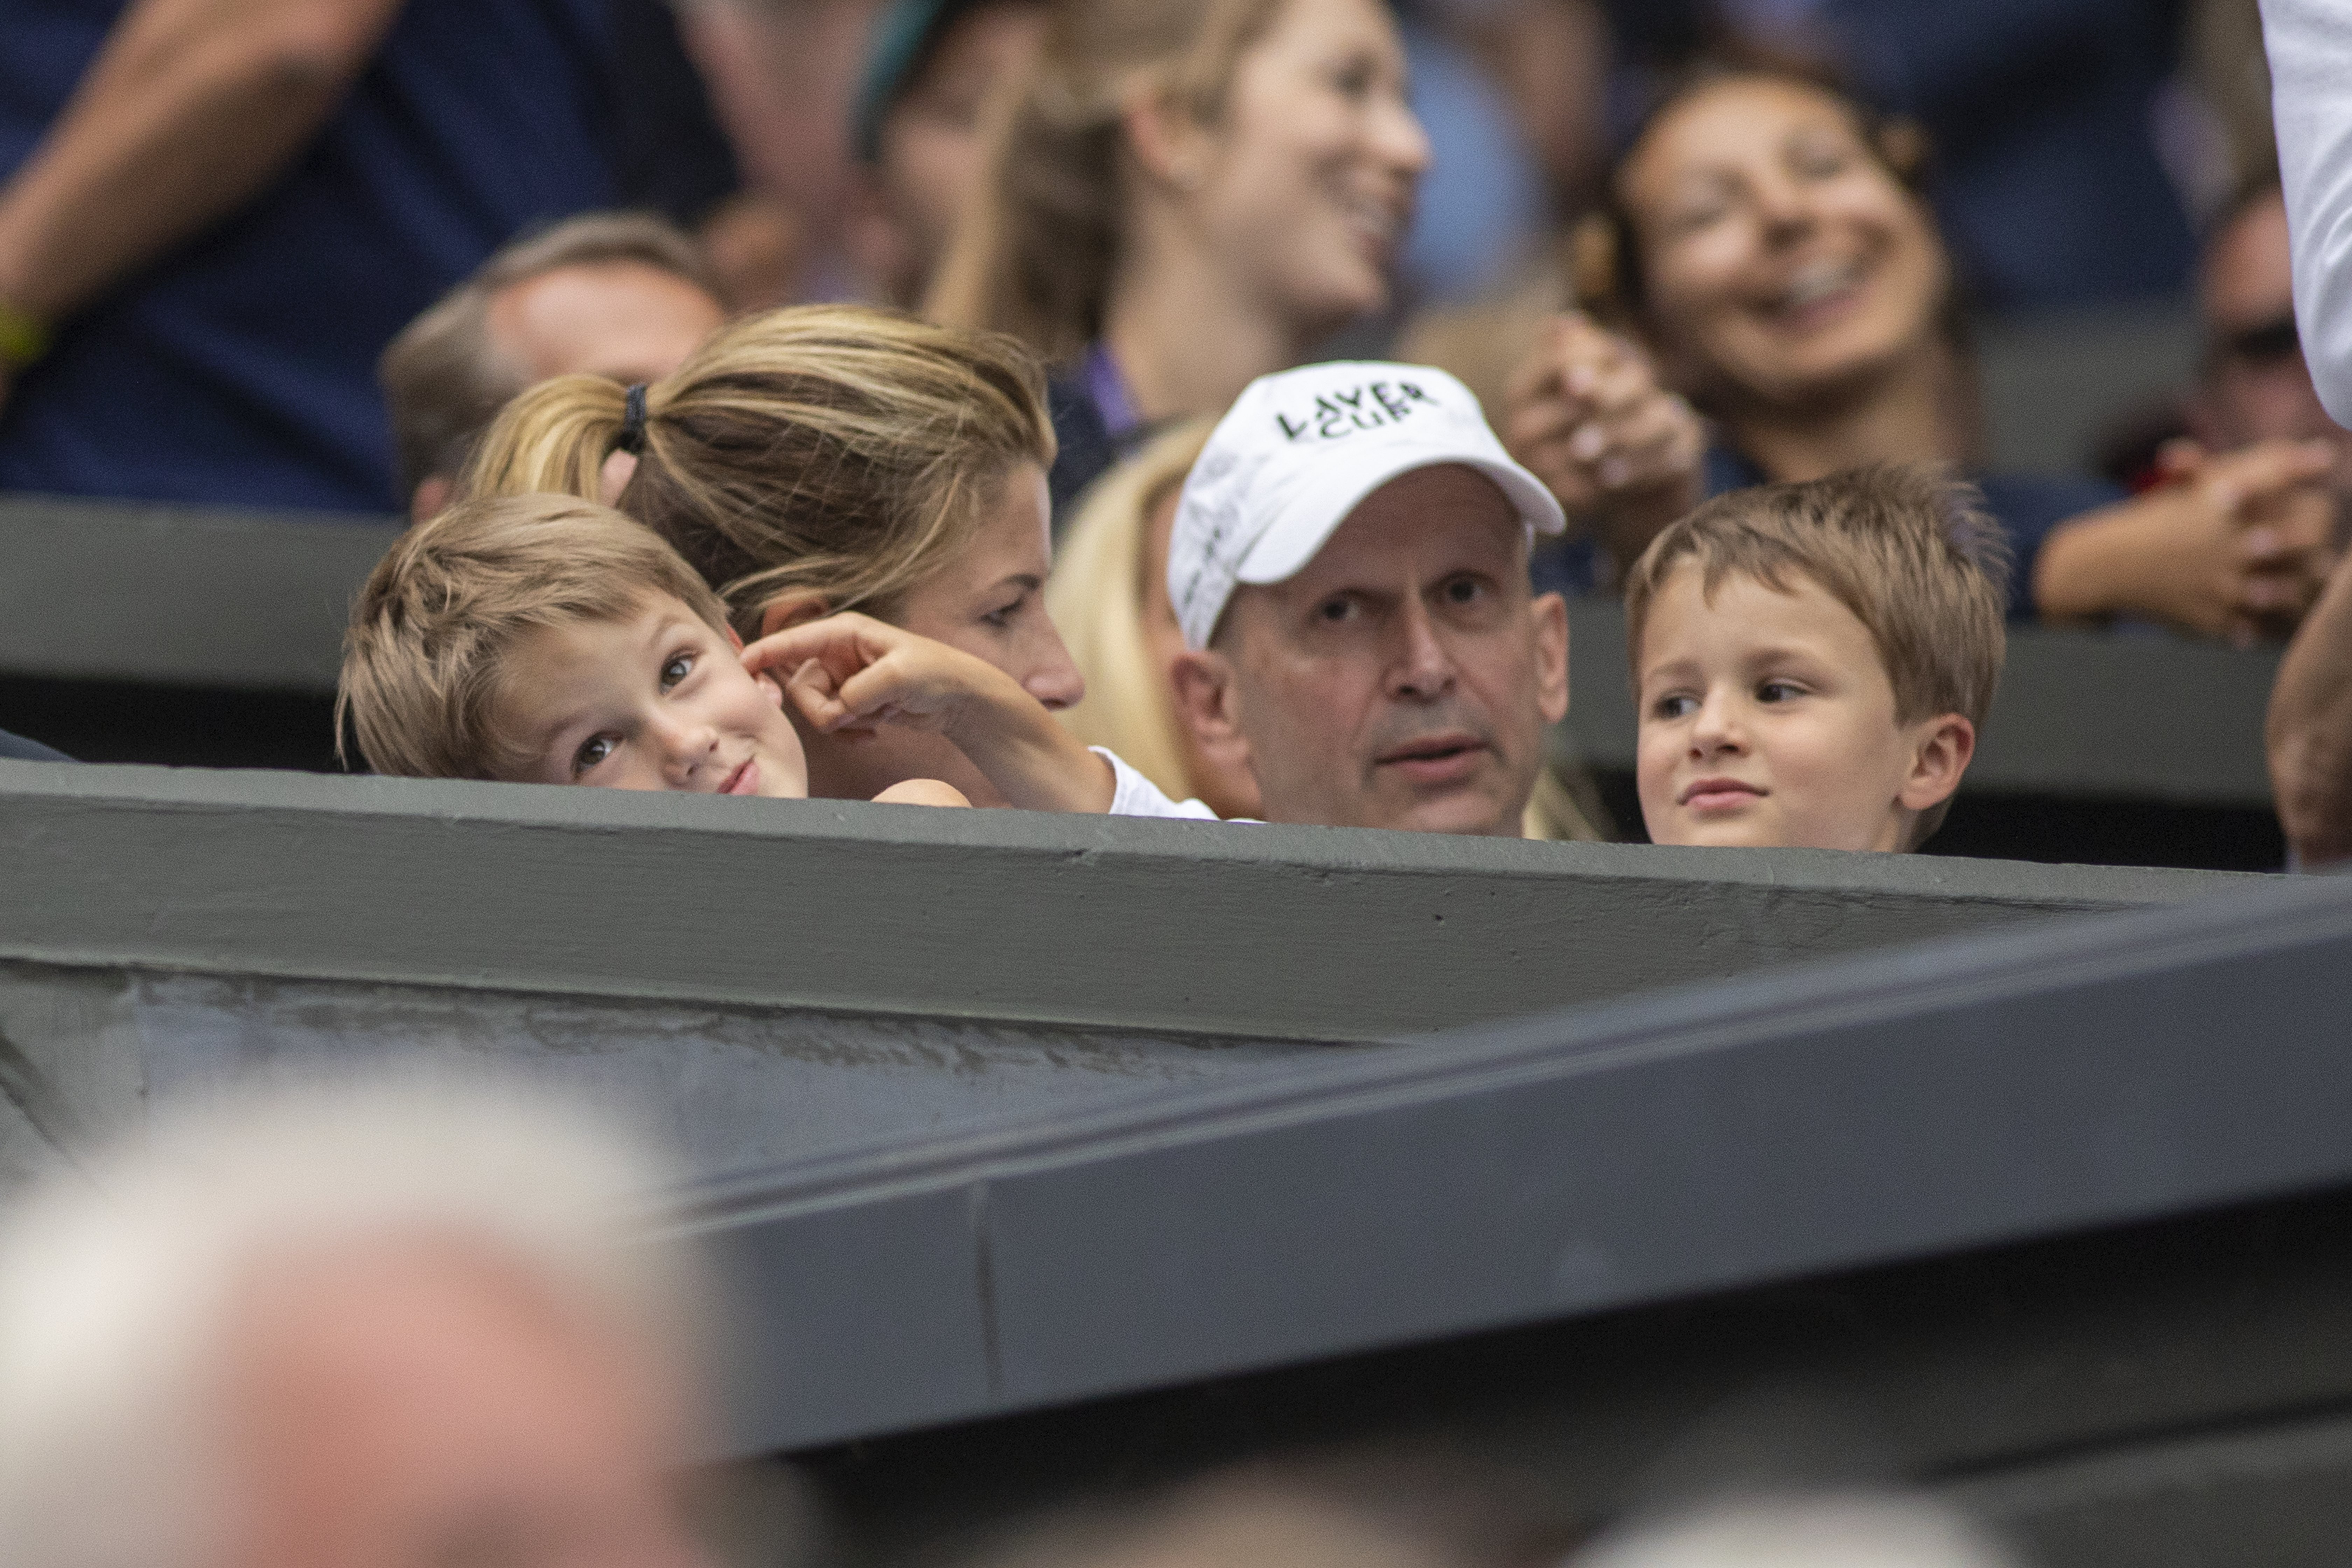 Lennert "Lenny" Federer playfully pokes his brother Leo's face as they sit on the sidelines with their mother, Mirka Federer, at Wimbledon on July 8, 2019, in London, England.  | Source: Getty Images